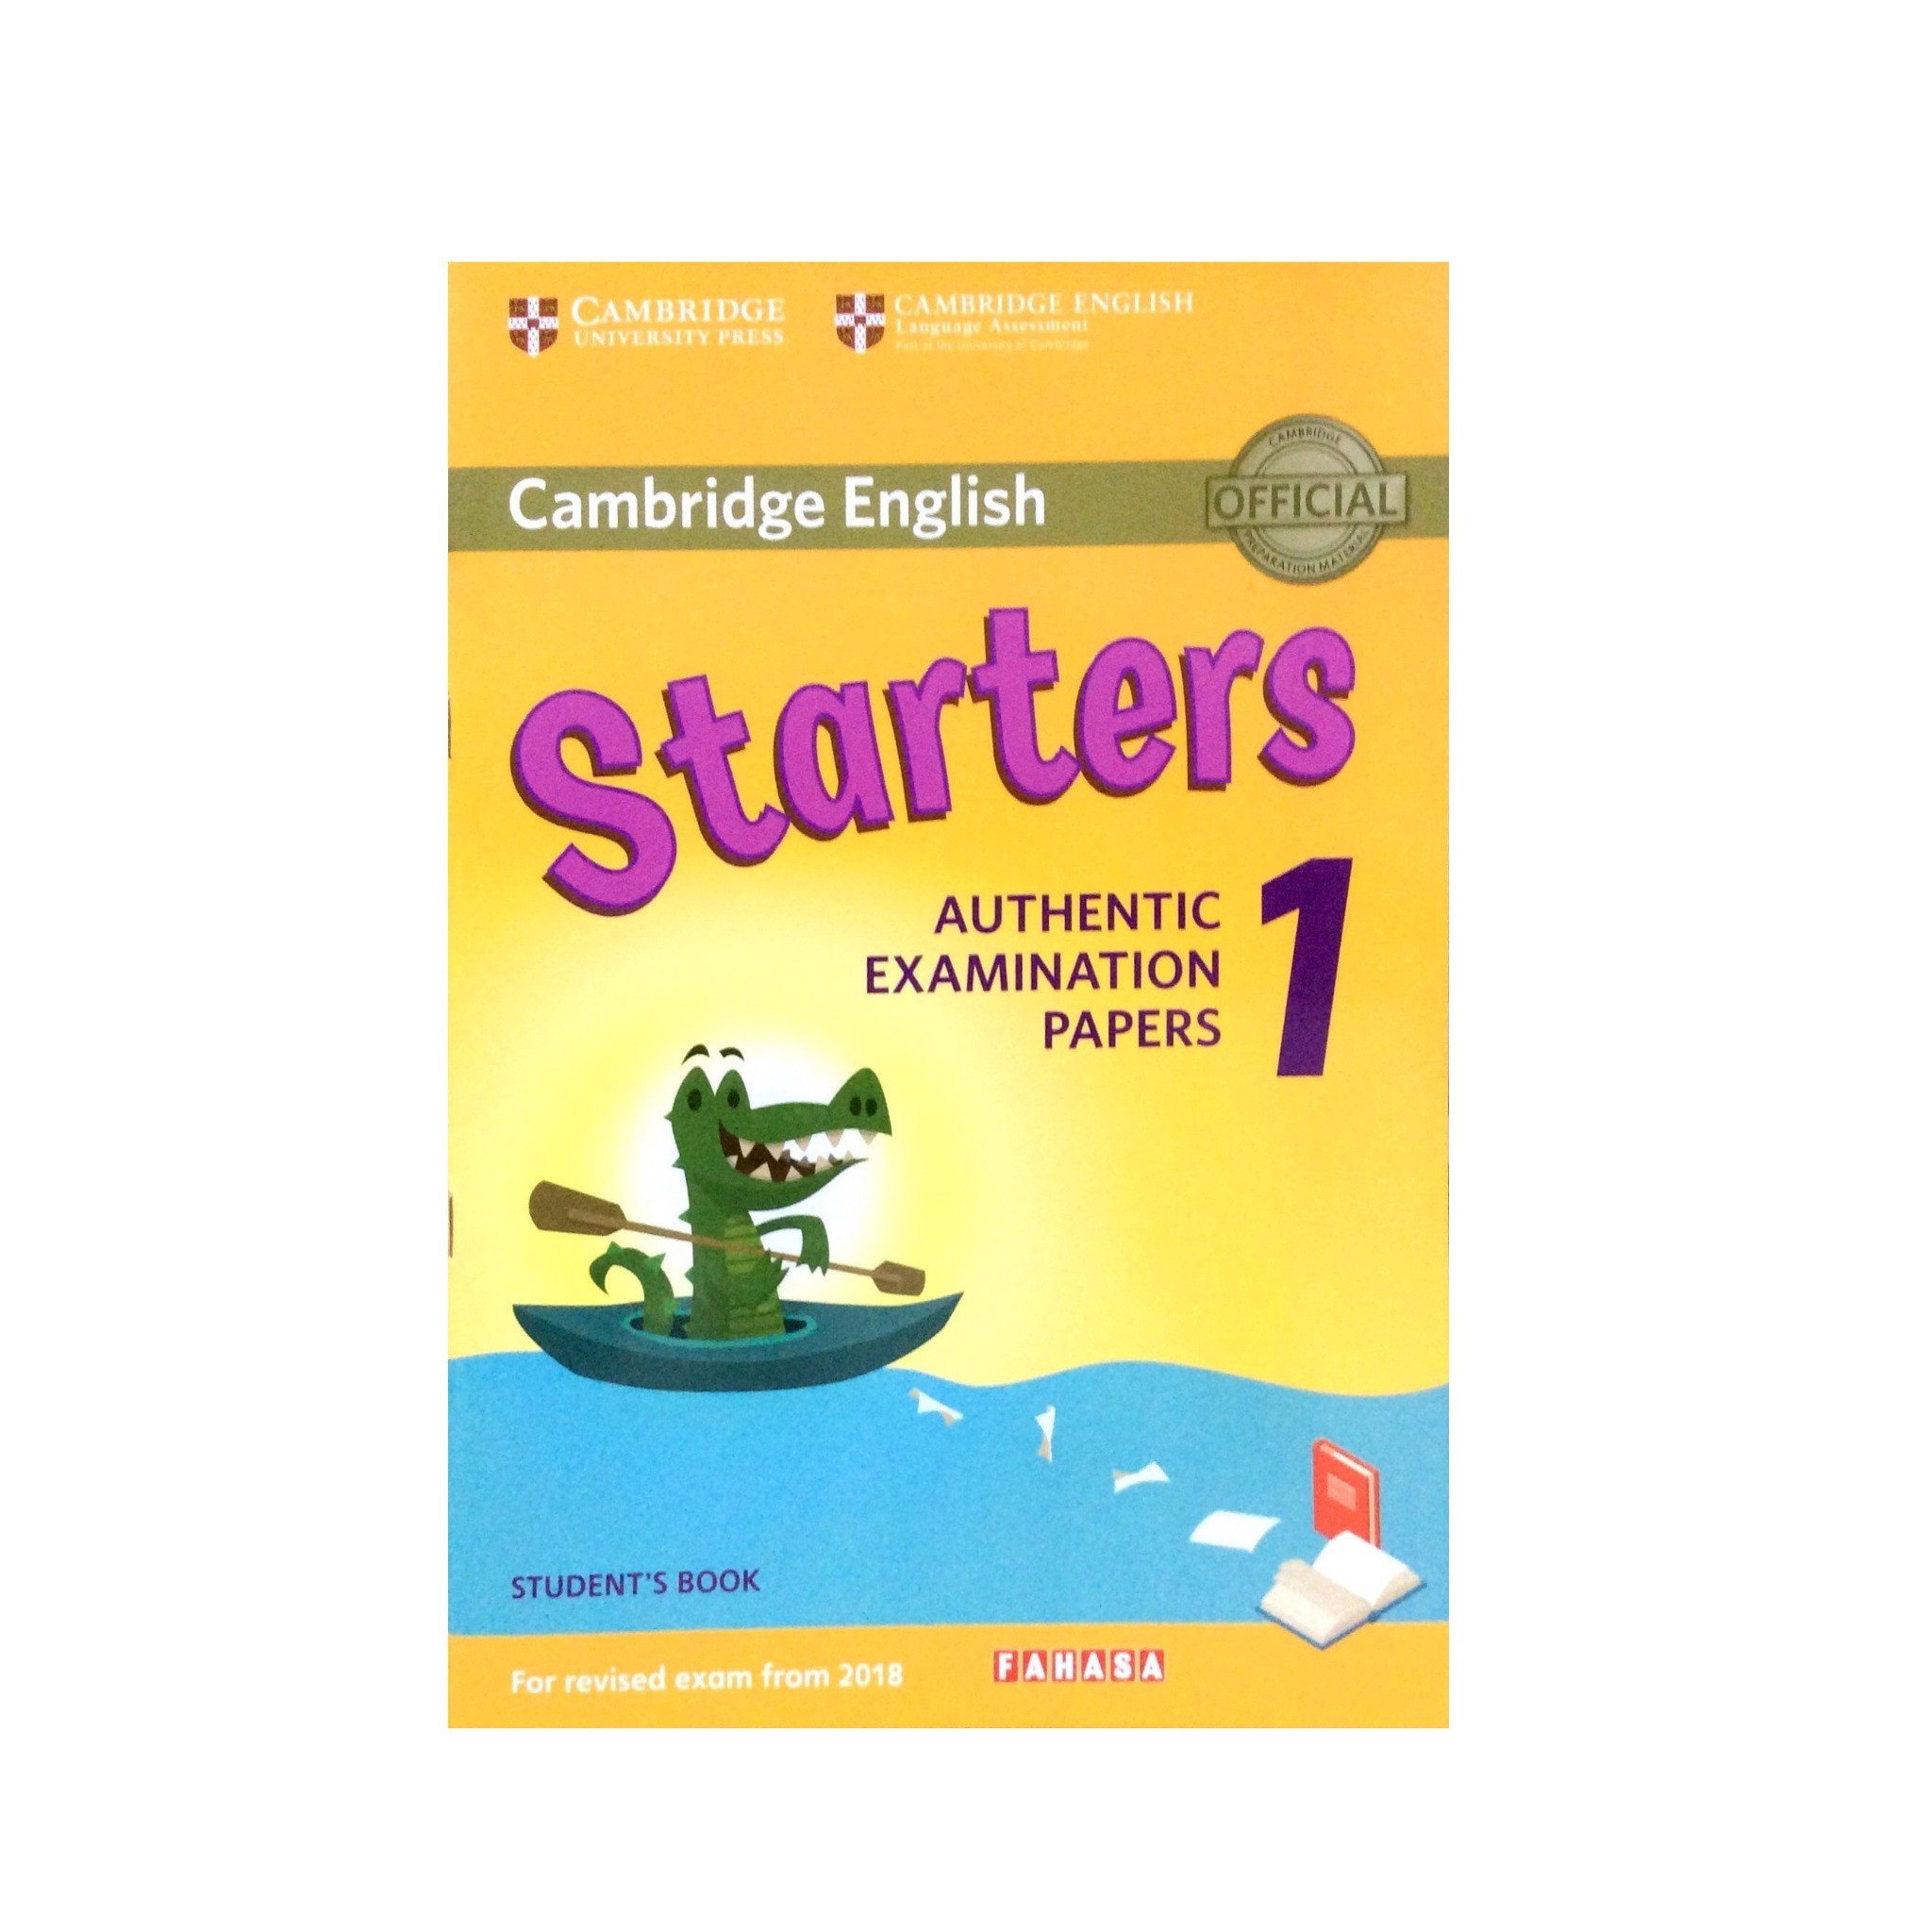 Cambridge English - Starters Authentic Examination Papers 1 - Student's Book